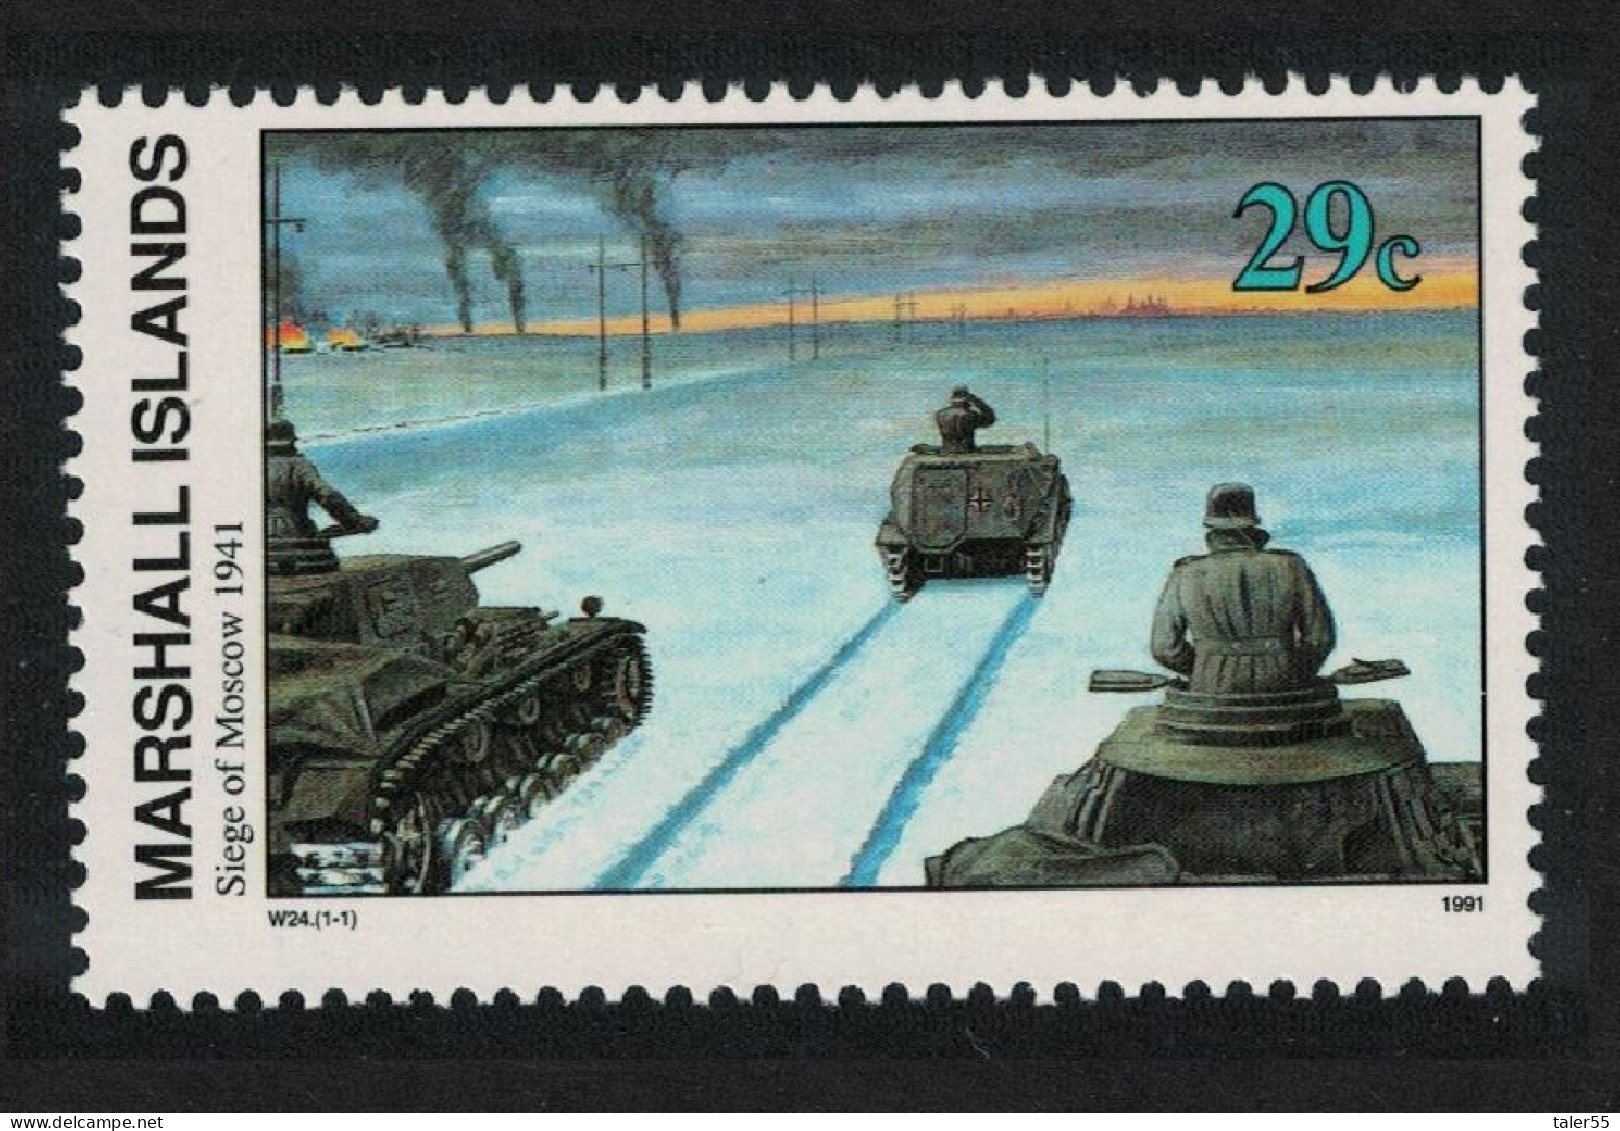 Marshall Is. Siege Of Moscow 1941 WWII 1991 MNH SG#373 - Islas Marshall